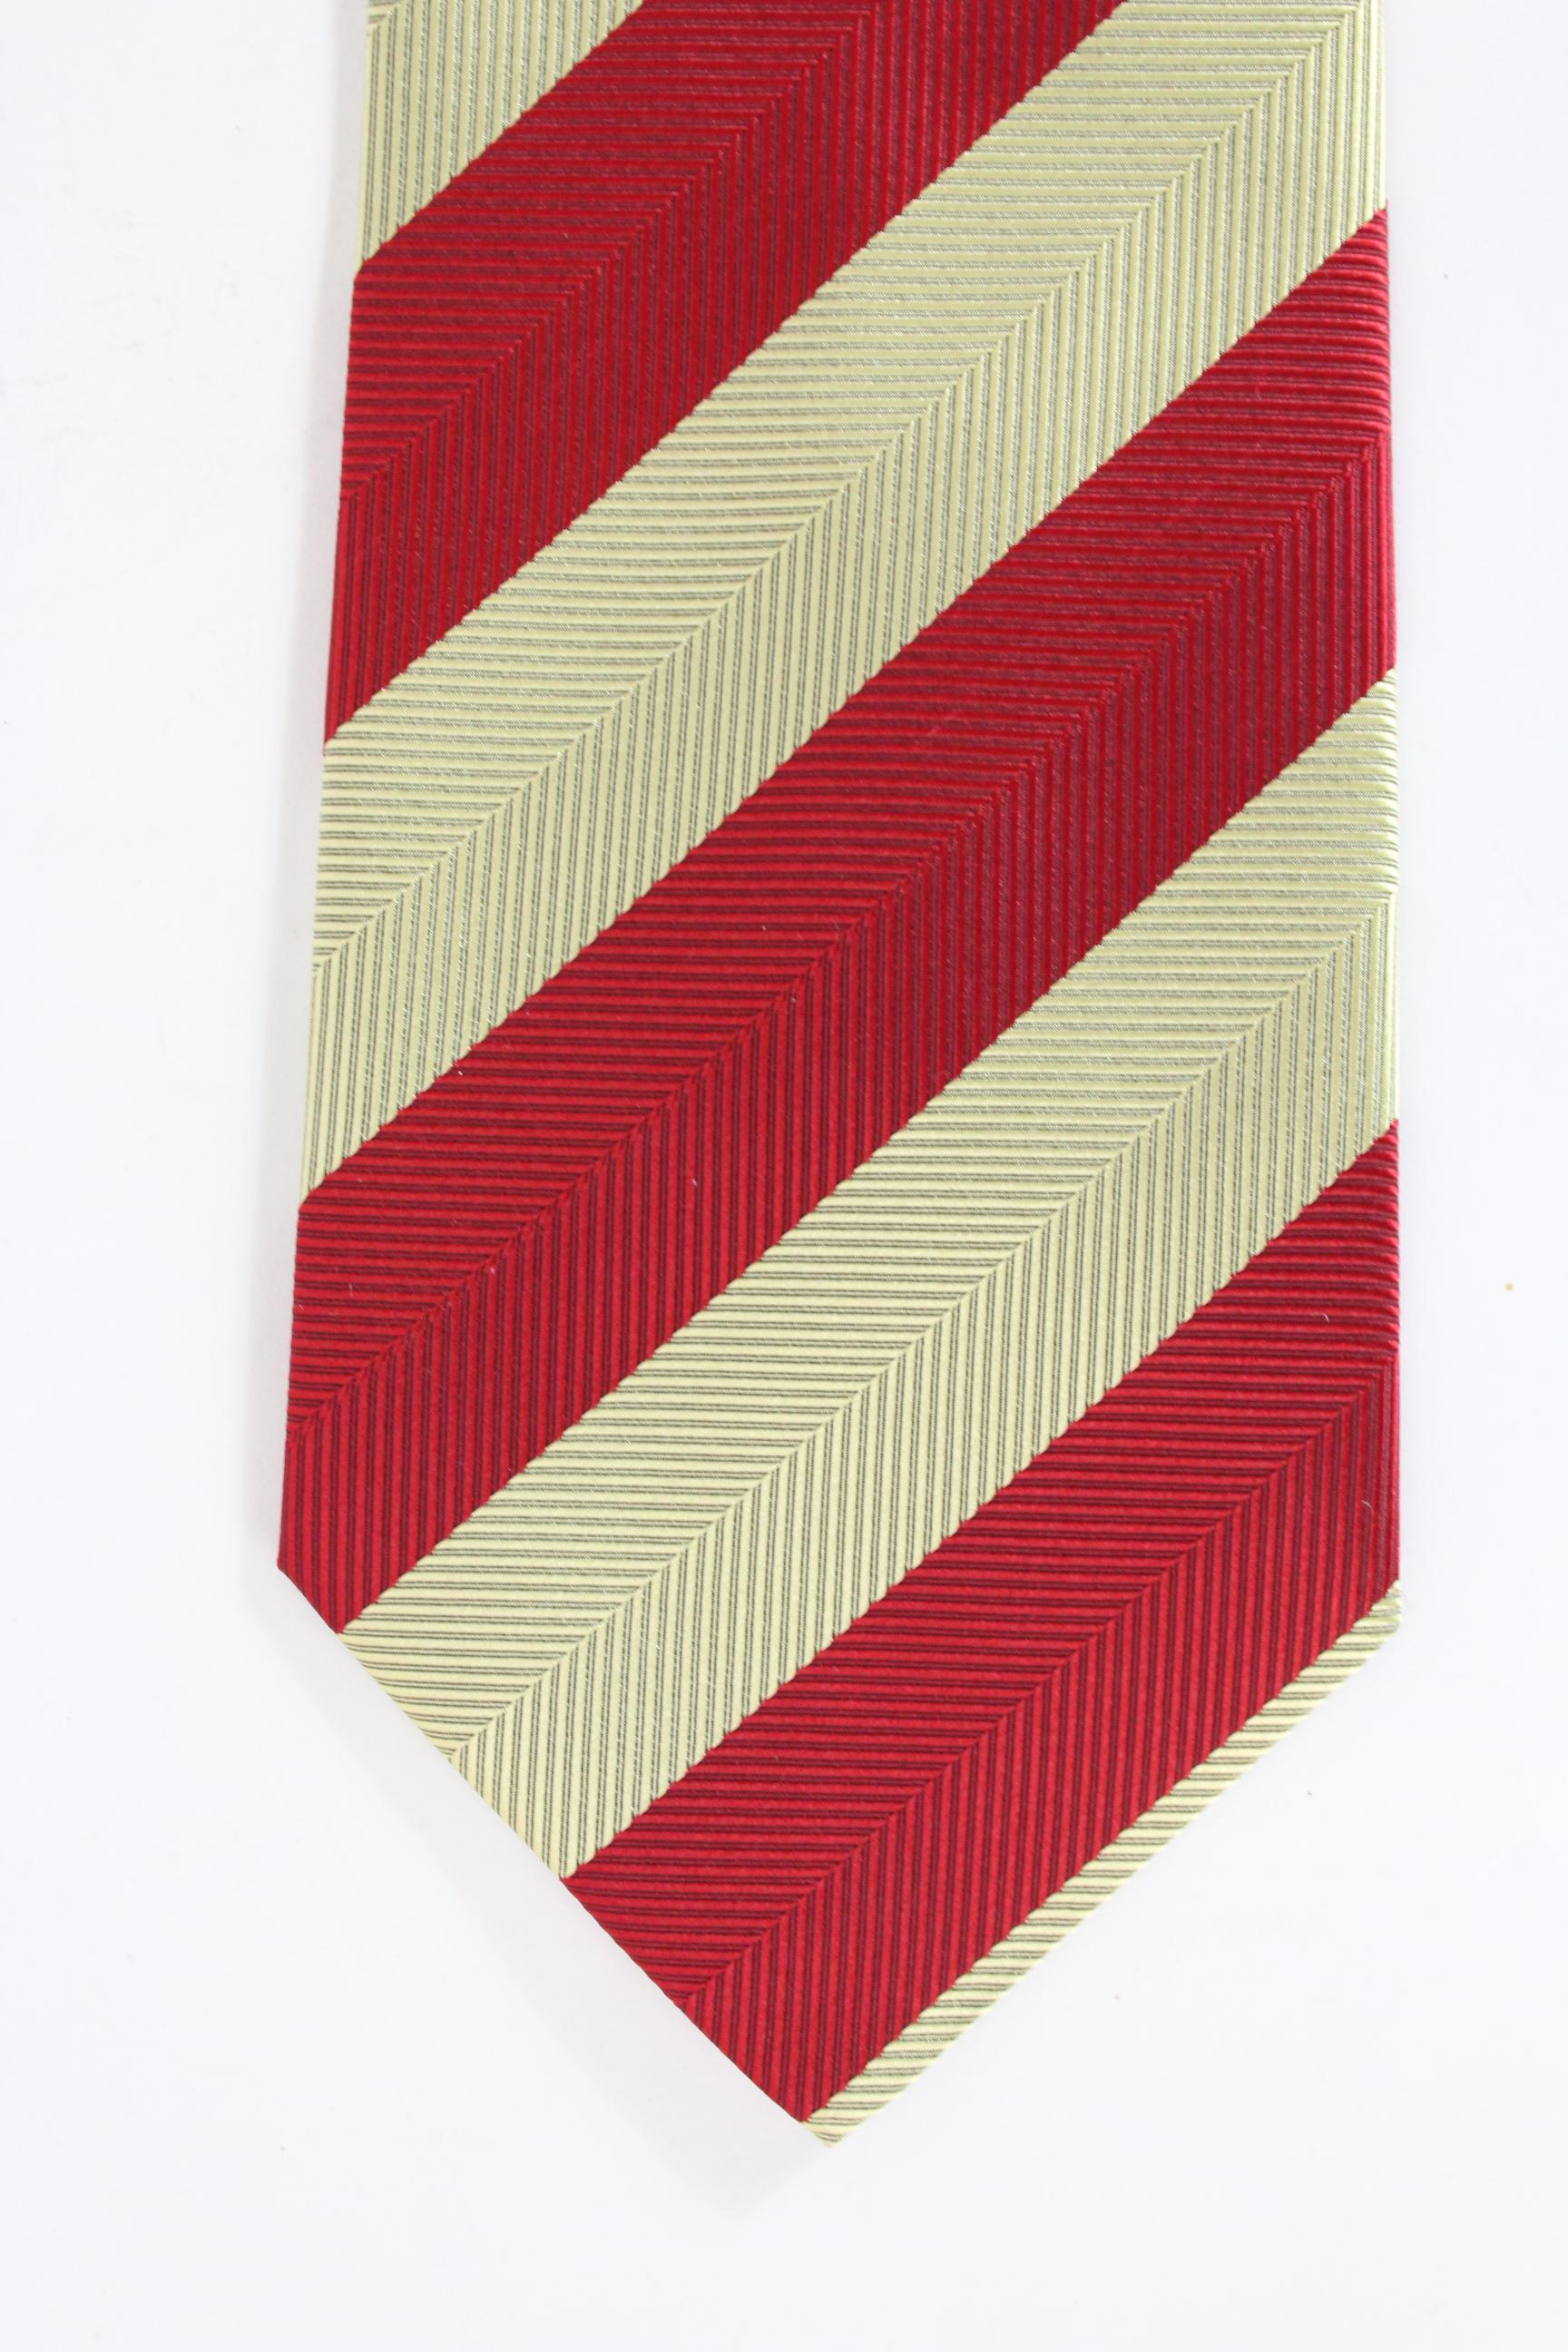 Guy Laroche elegant vintage tie 90s. Classic, regimental model, red and gold color, 100% silk. Made in Italy. New with tag.

Width: 10 cm

Length: 143 cm